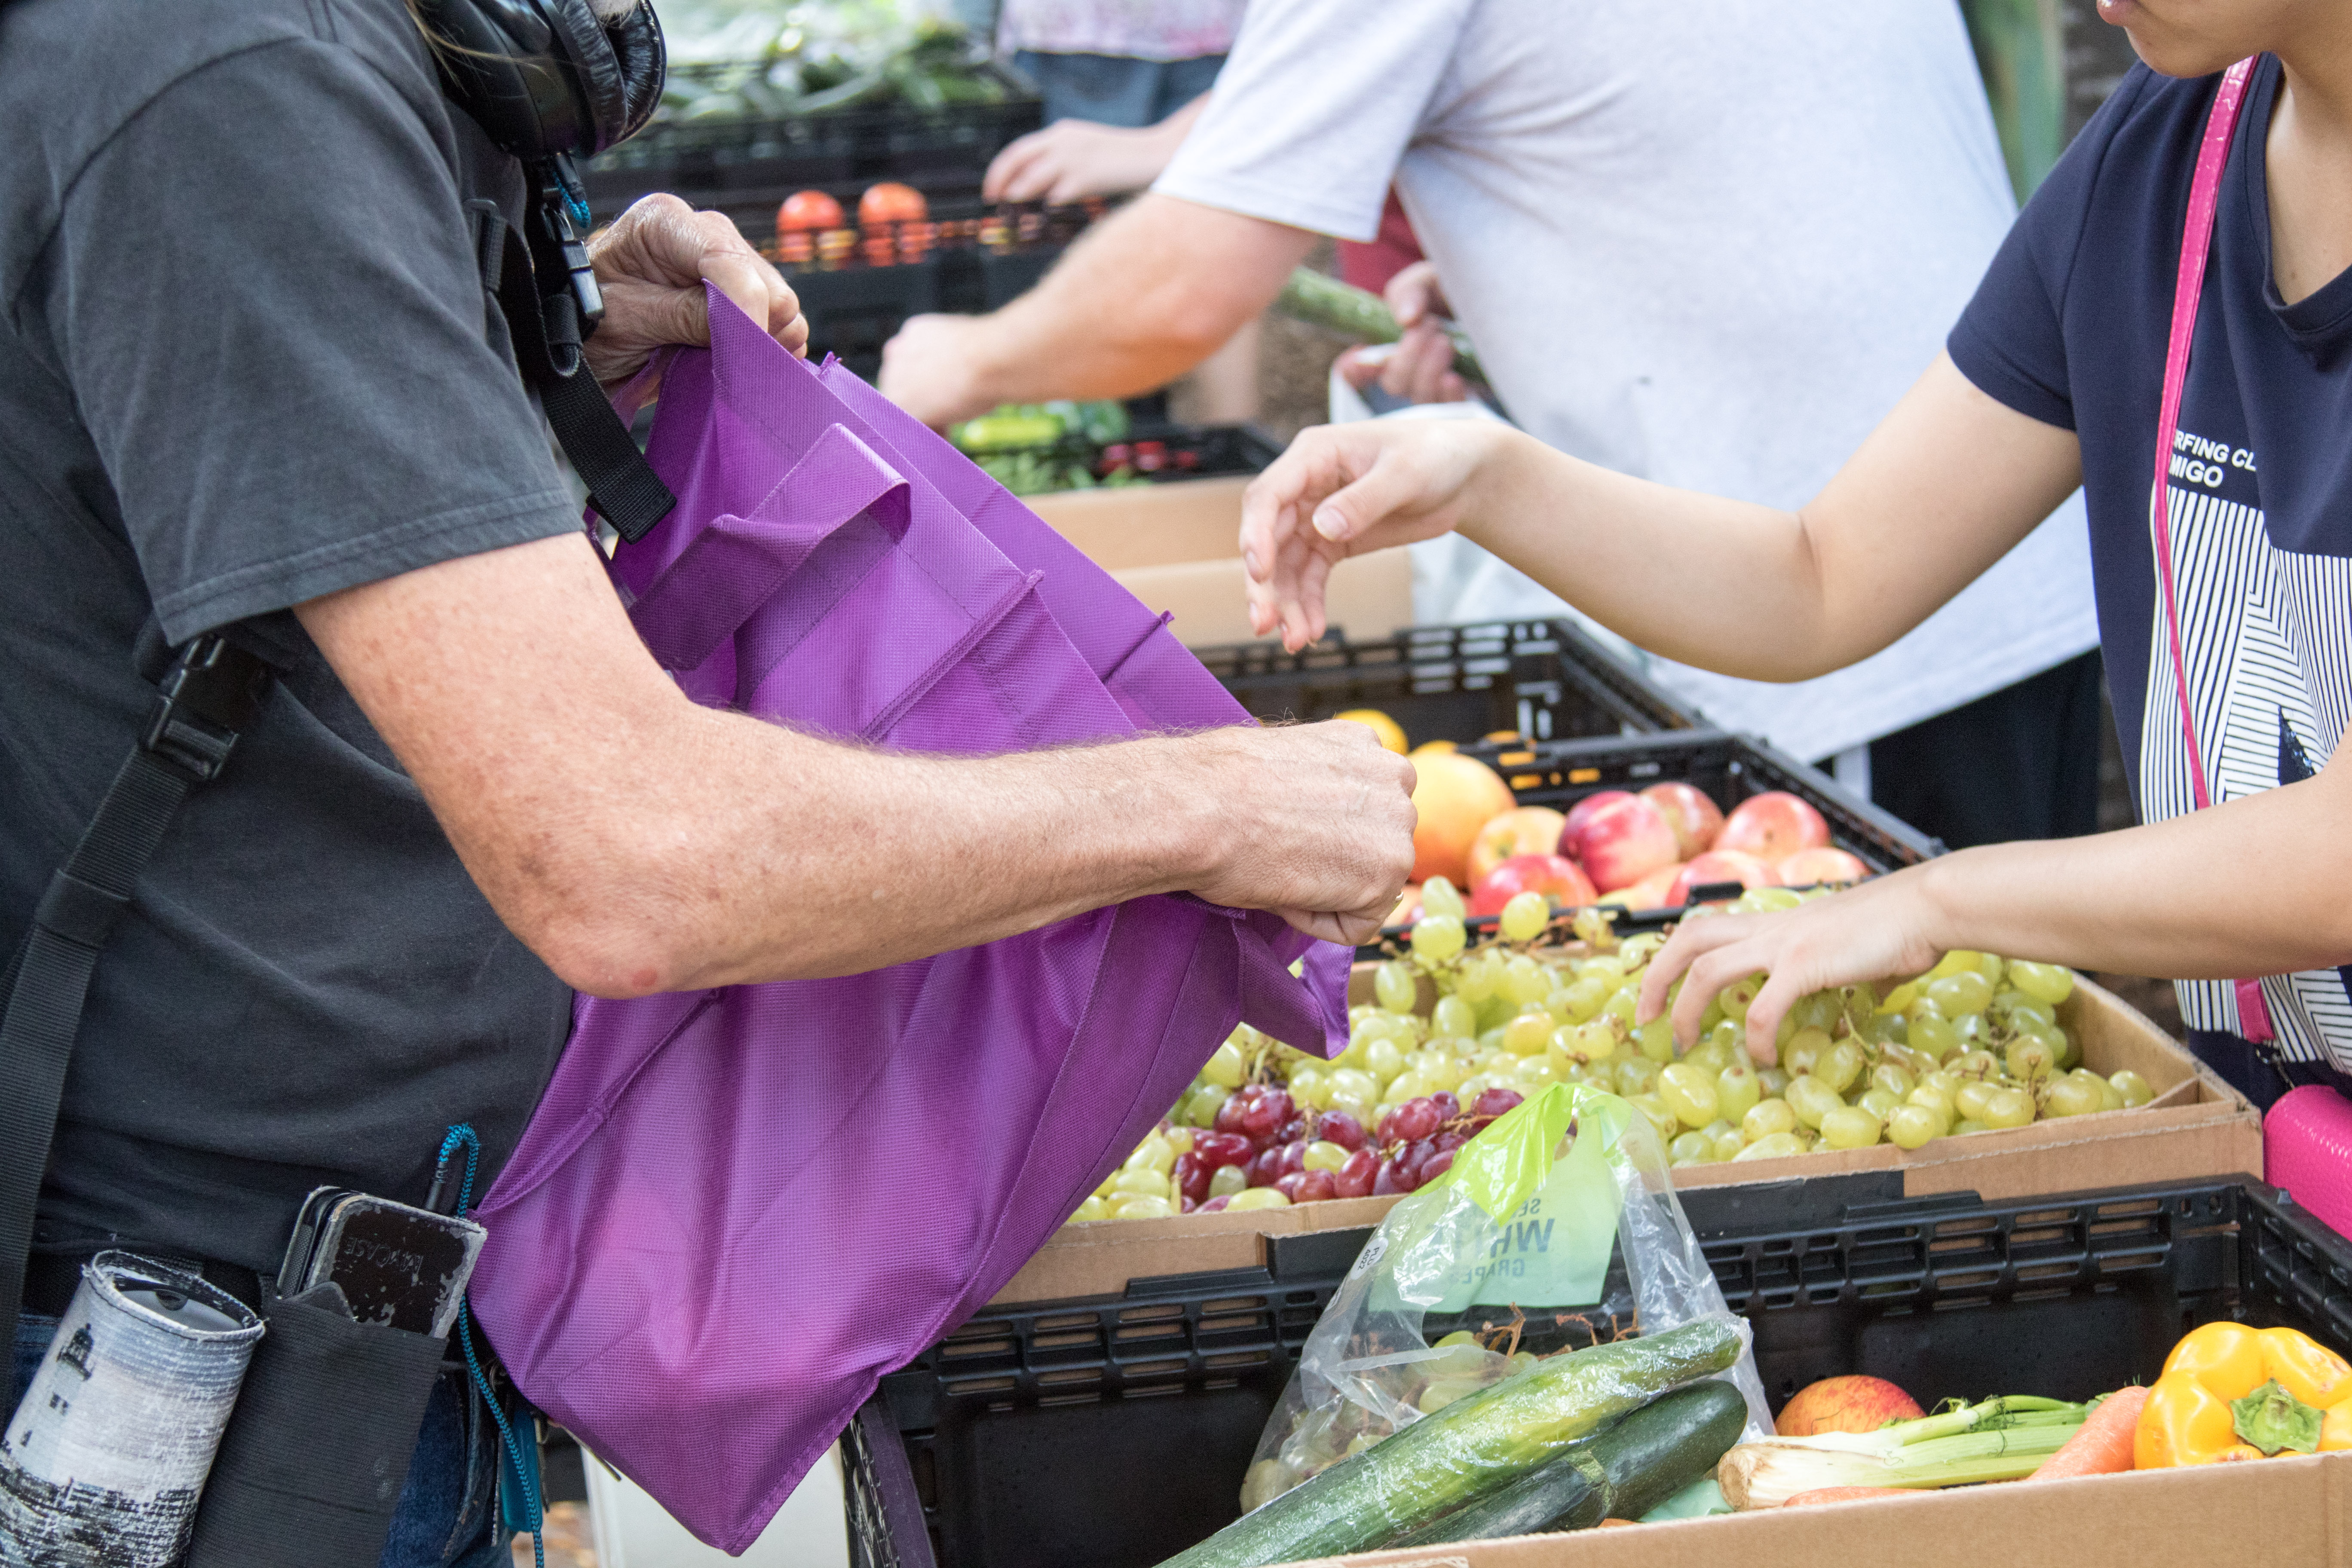 Person getting food from a market, carrying a purple bag.